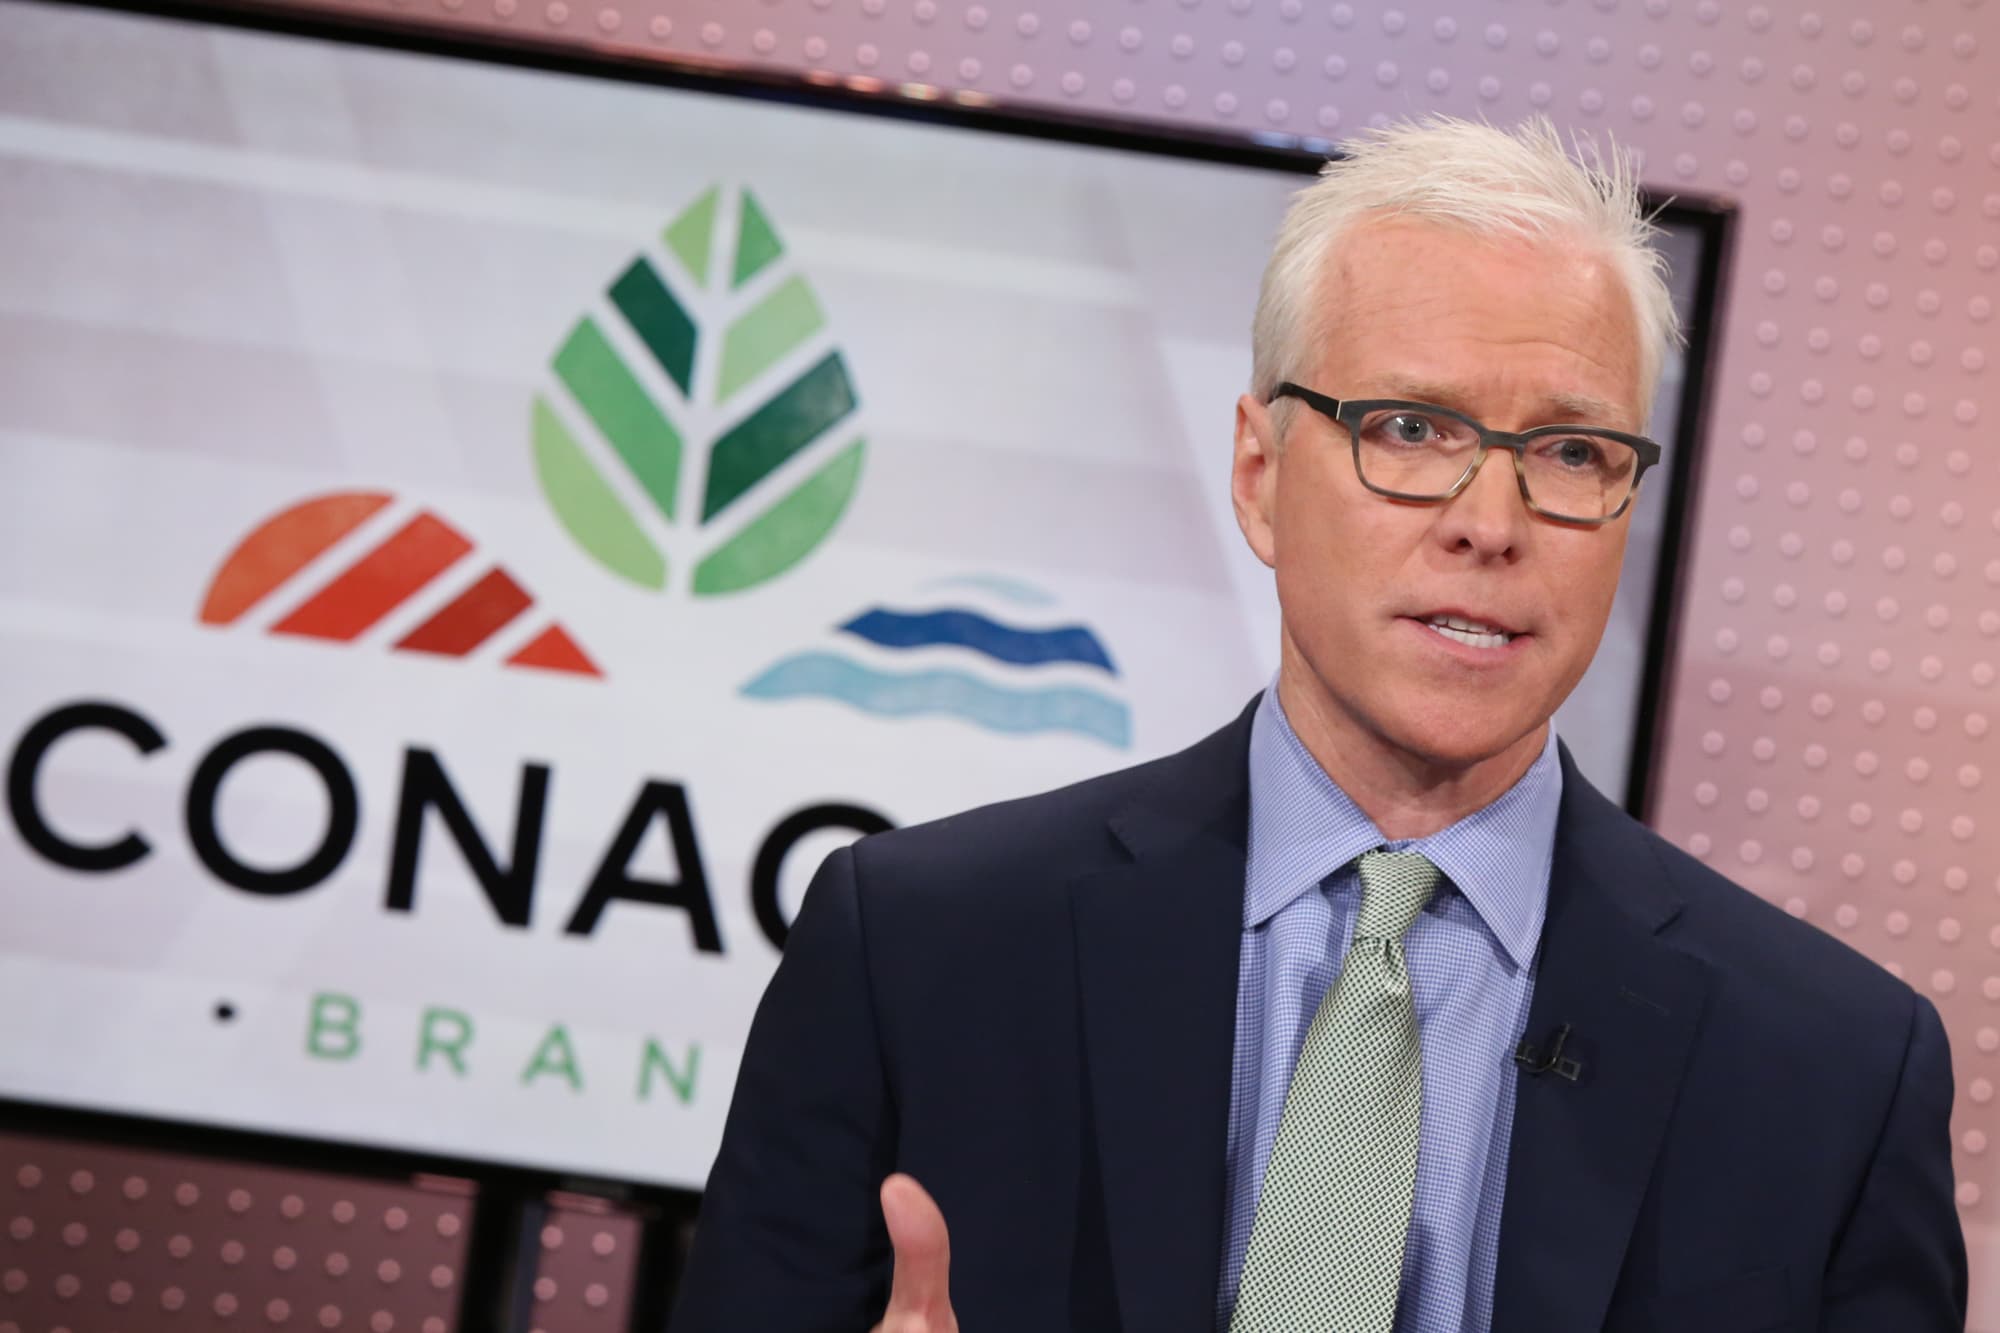 Conagra Brands CEO says inflation won’t go away even after Covid omicron wave passes